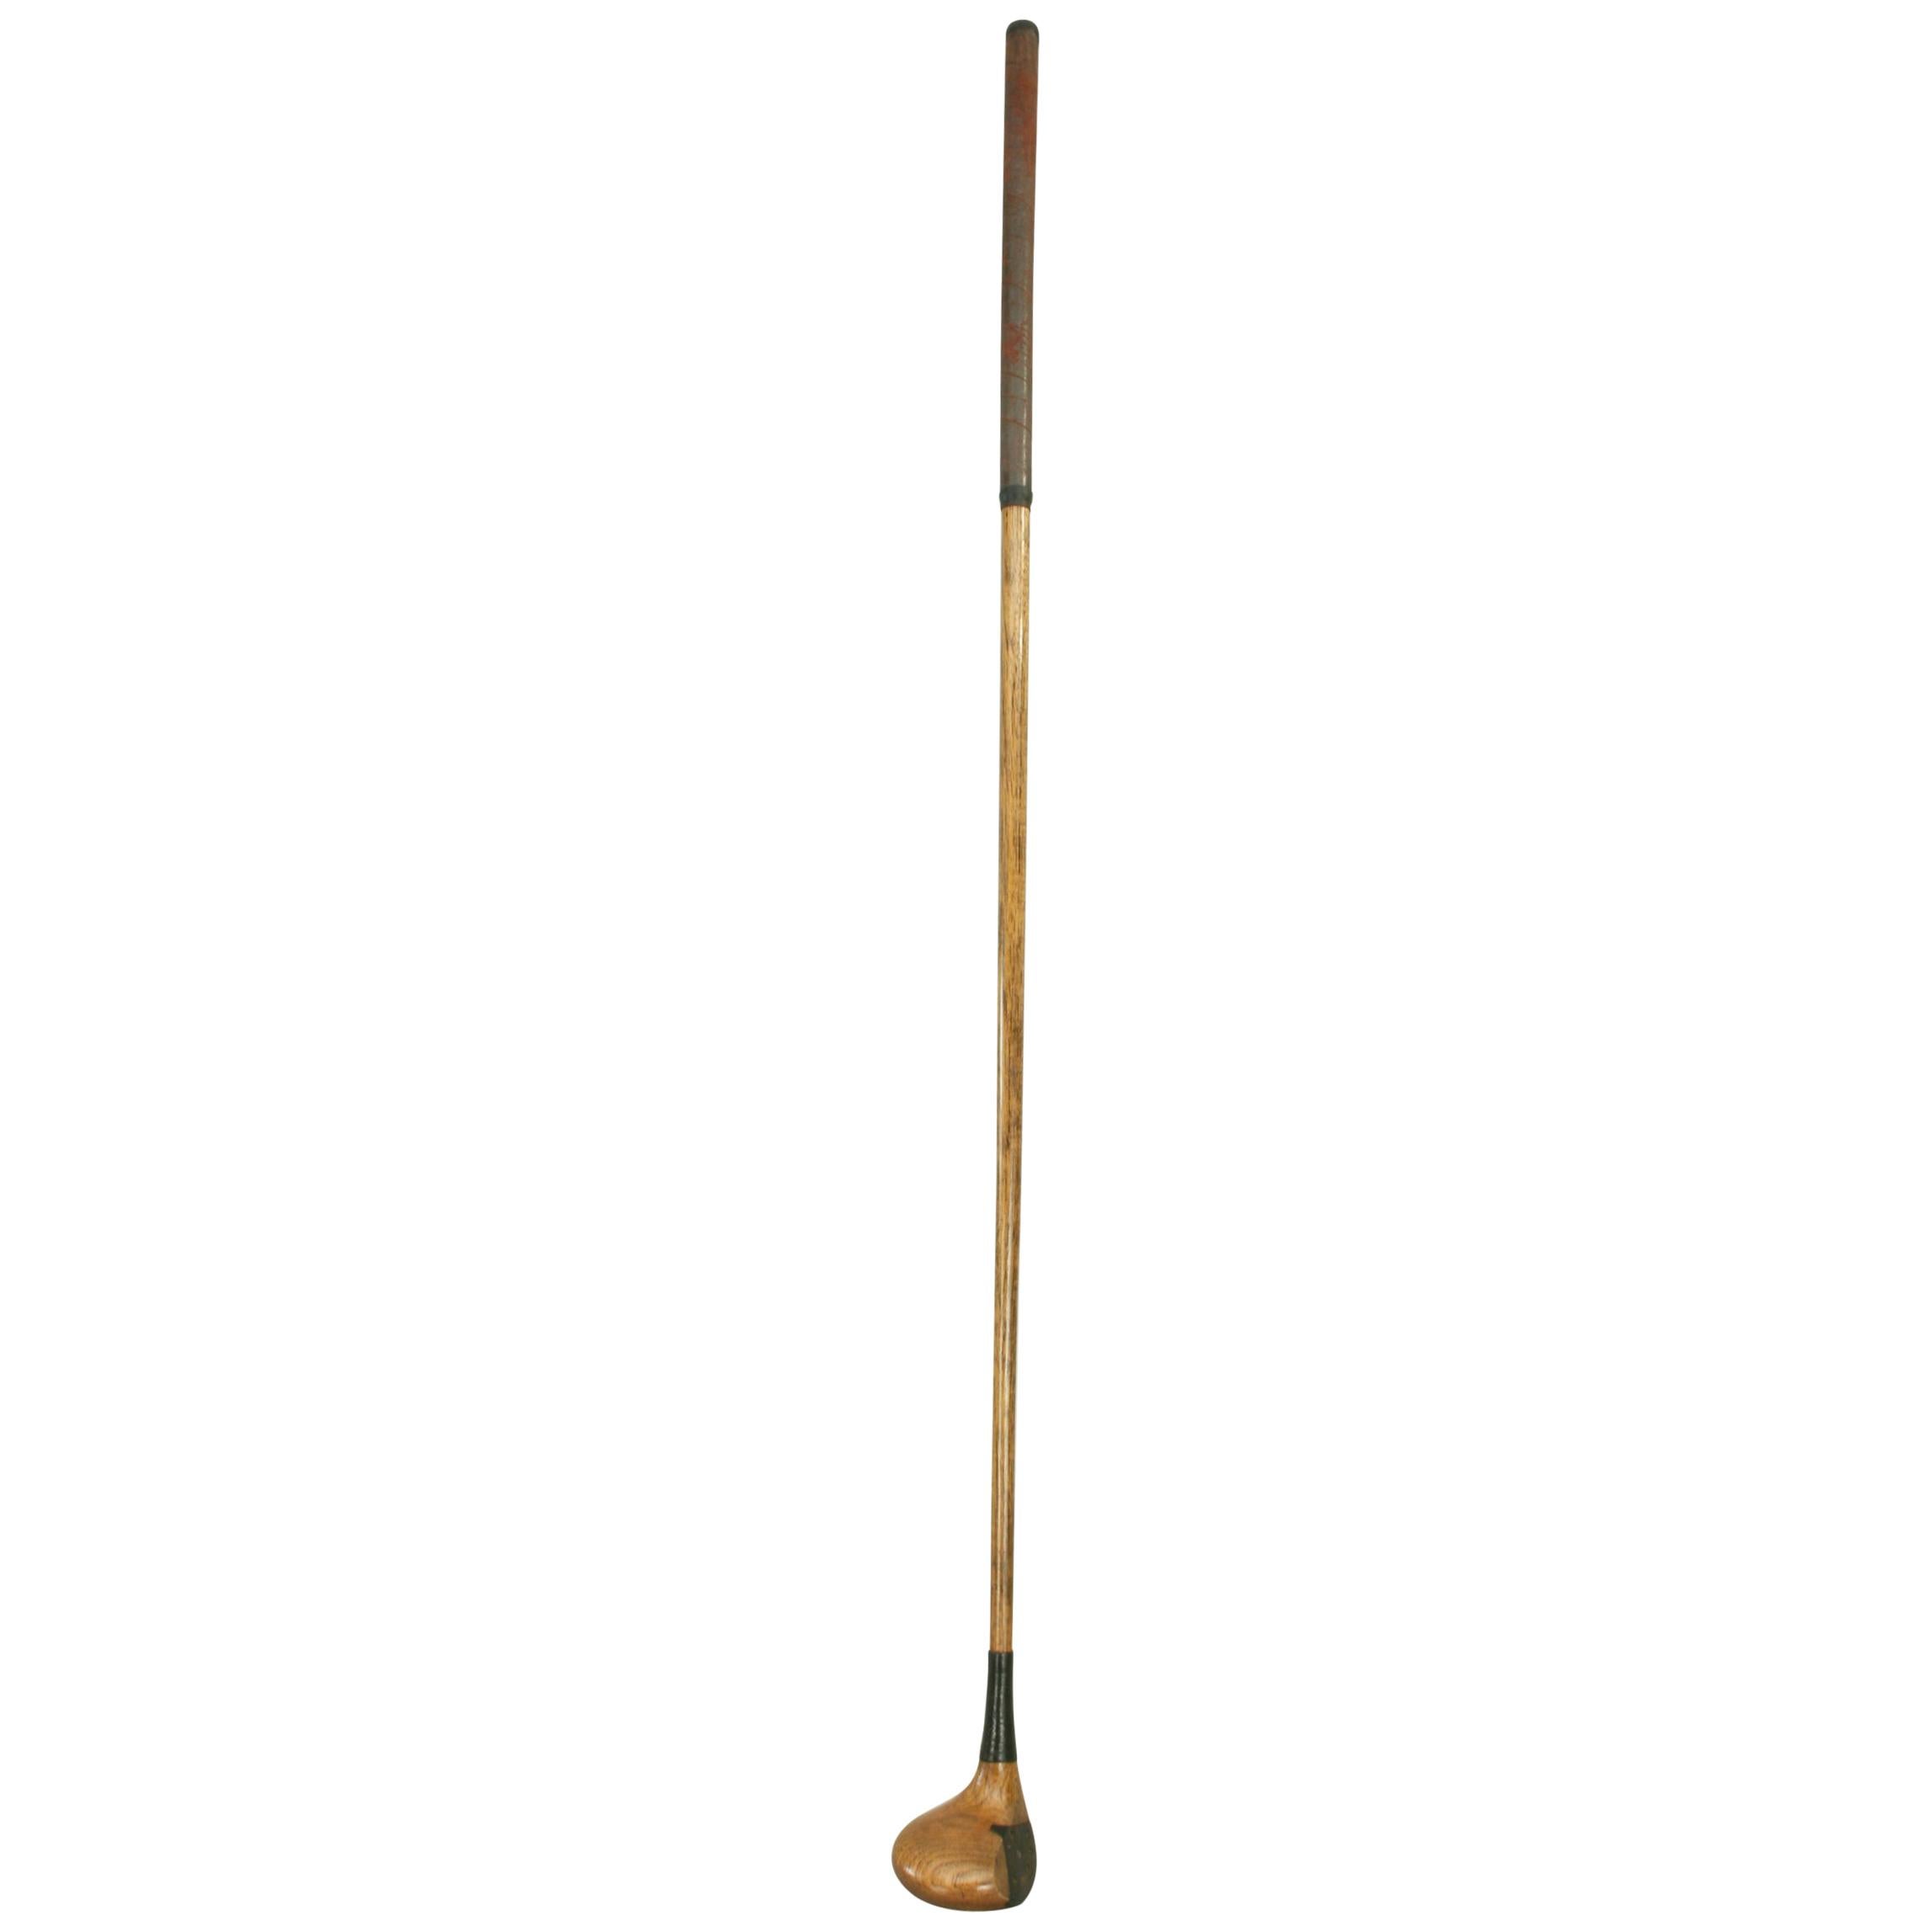 Antique Hickory Golf Club, Brassie with Face Insert and Brass Sole Plate